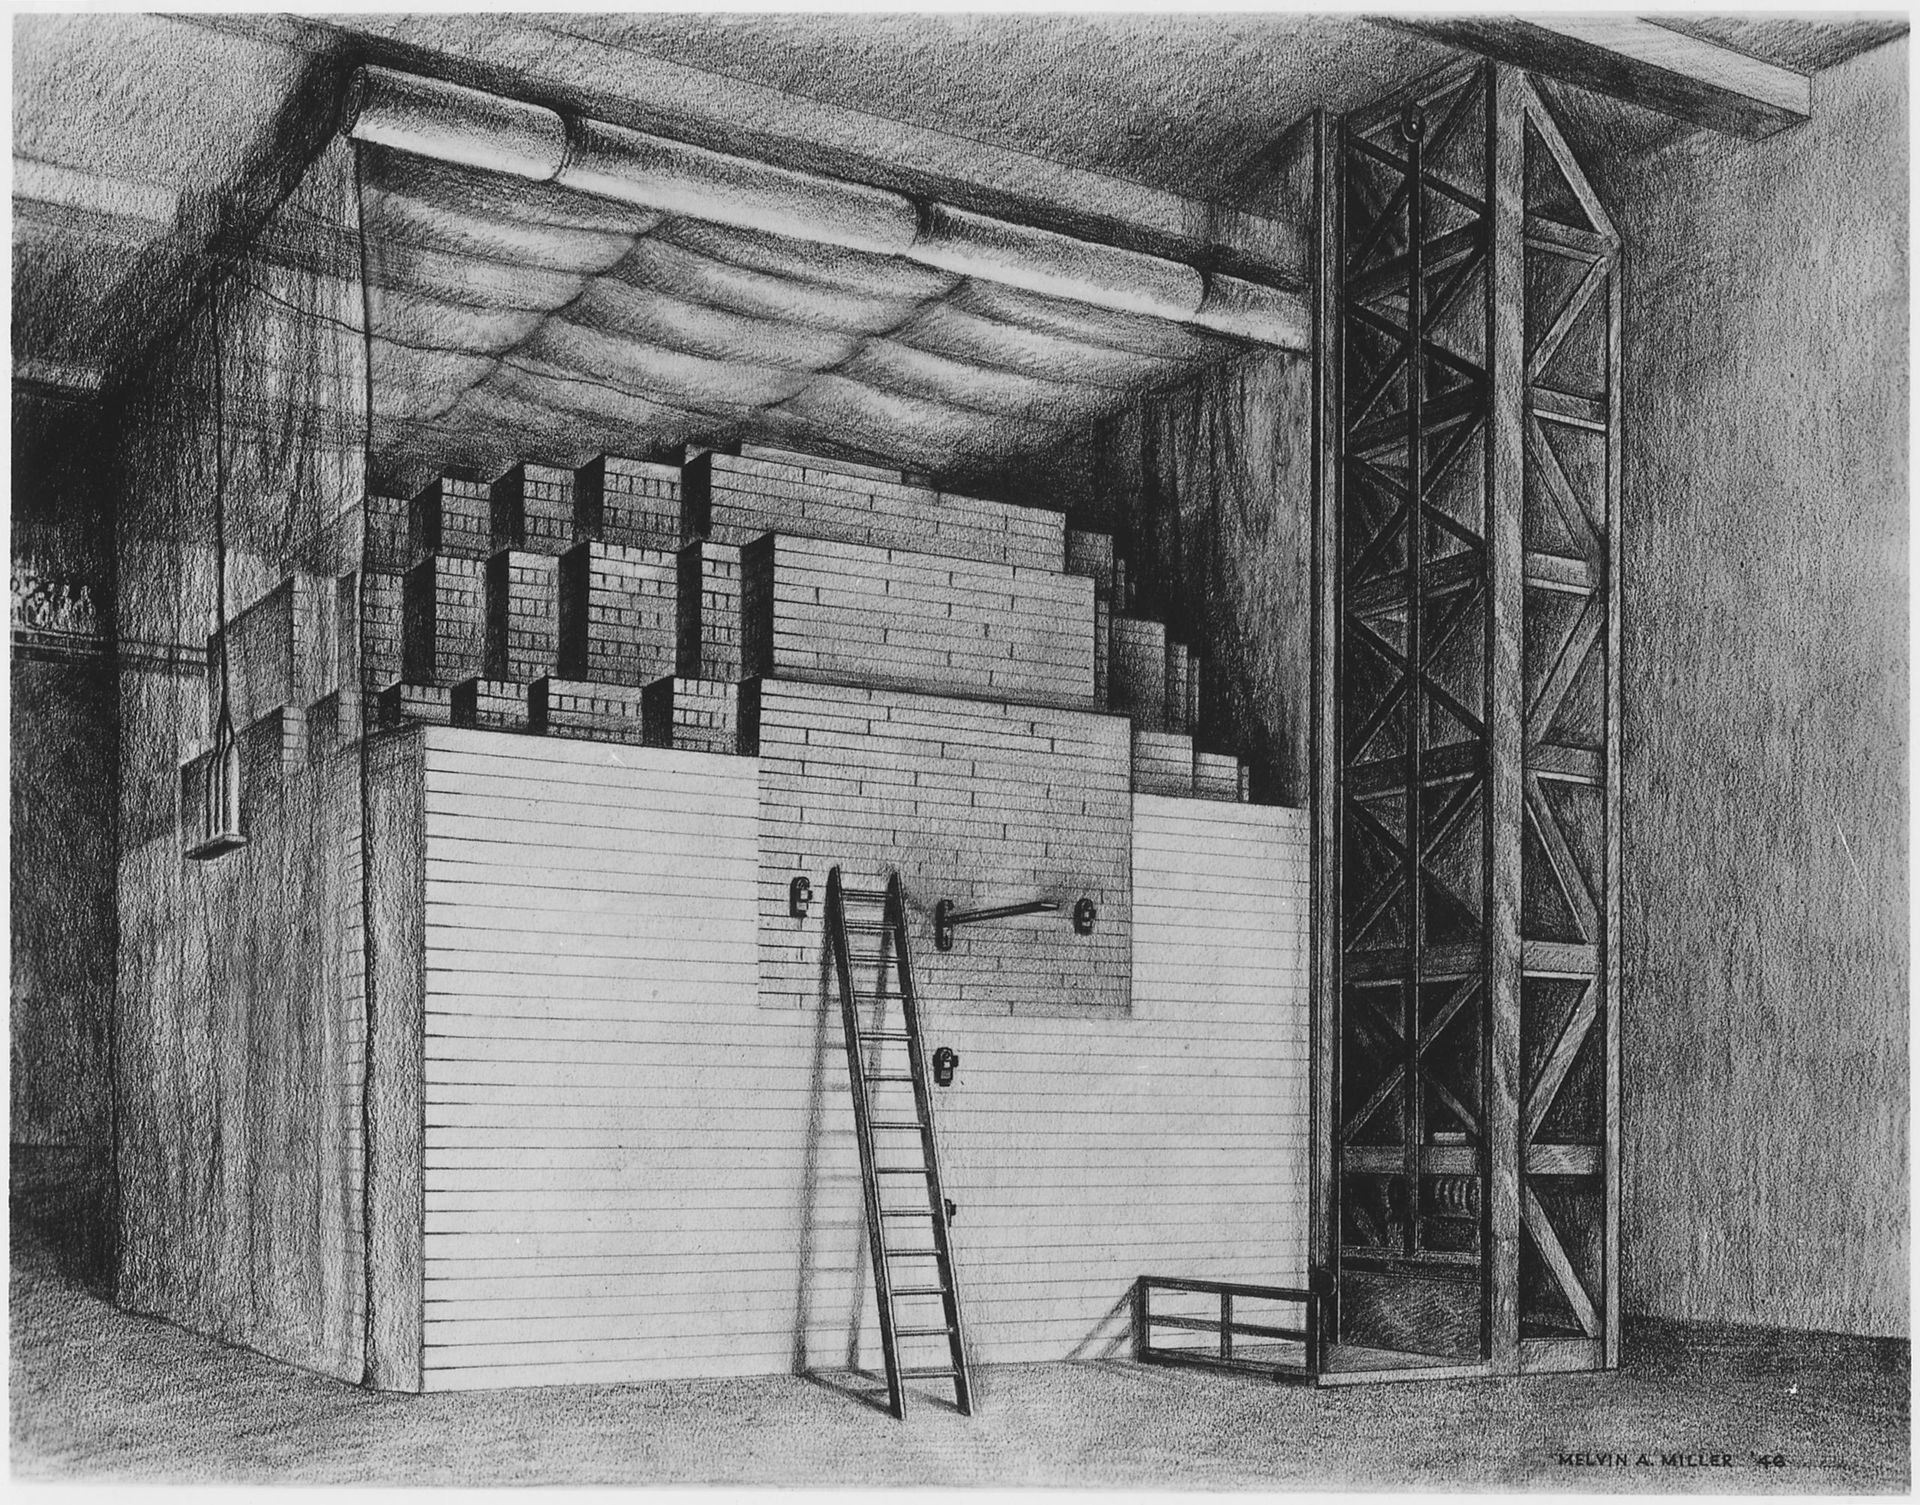 
World's First Nuclear Reactor, world record in Chicago, Illinois